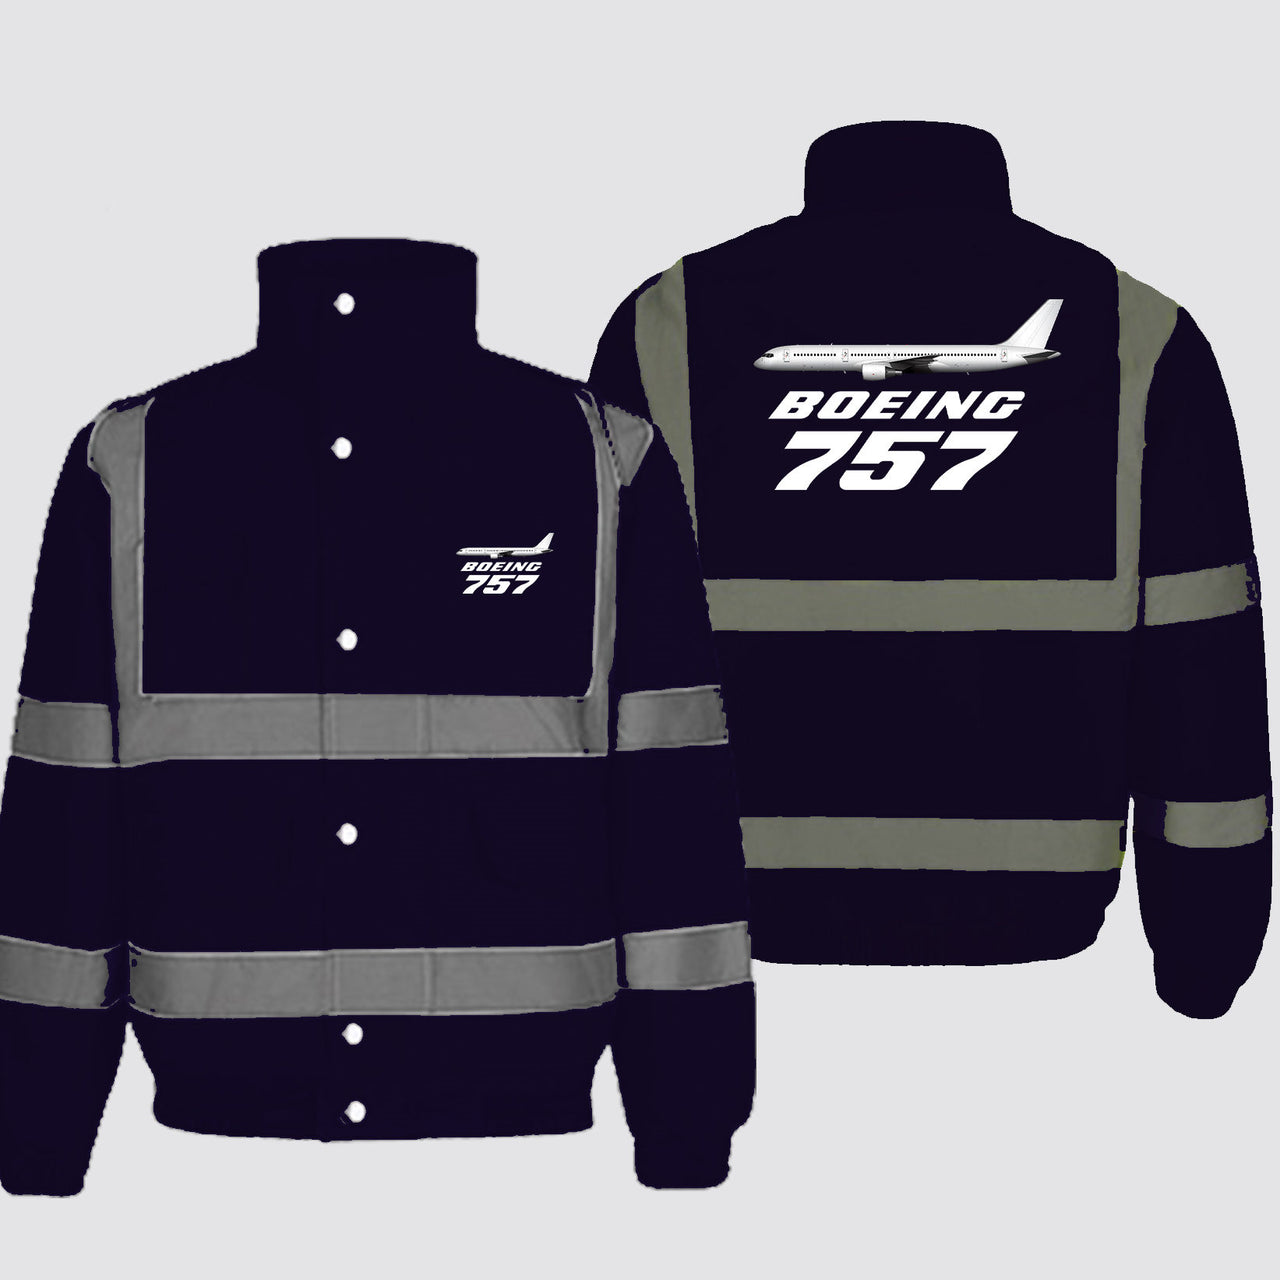 The Boeing 757 Designed Reflective Winter Jackets